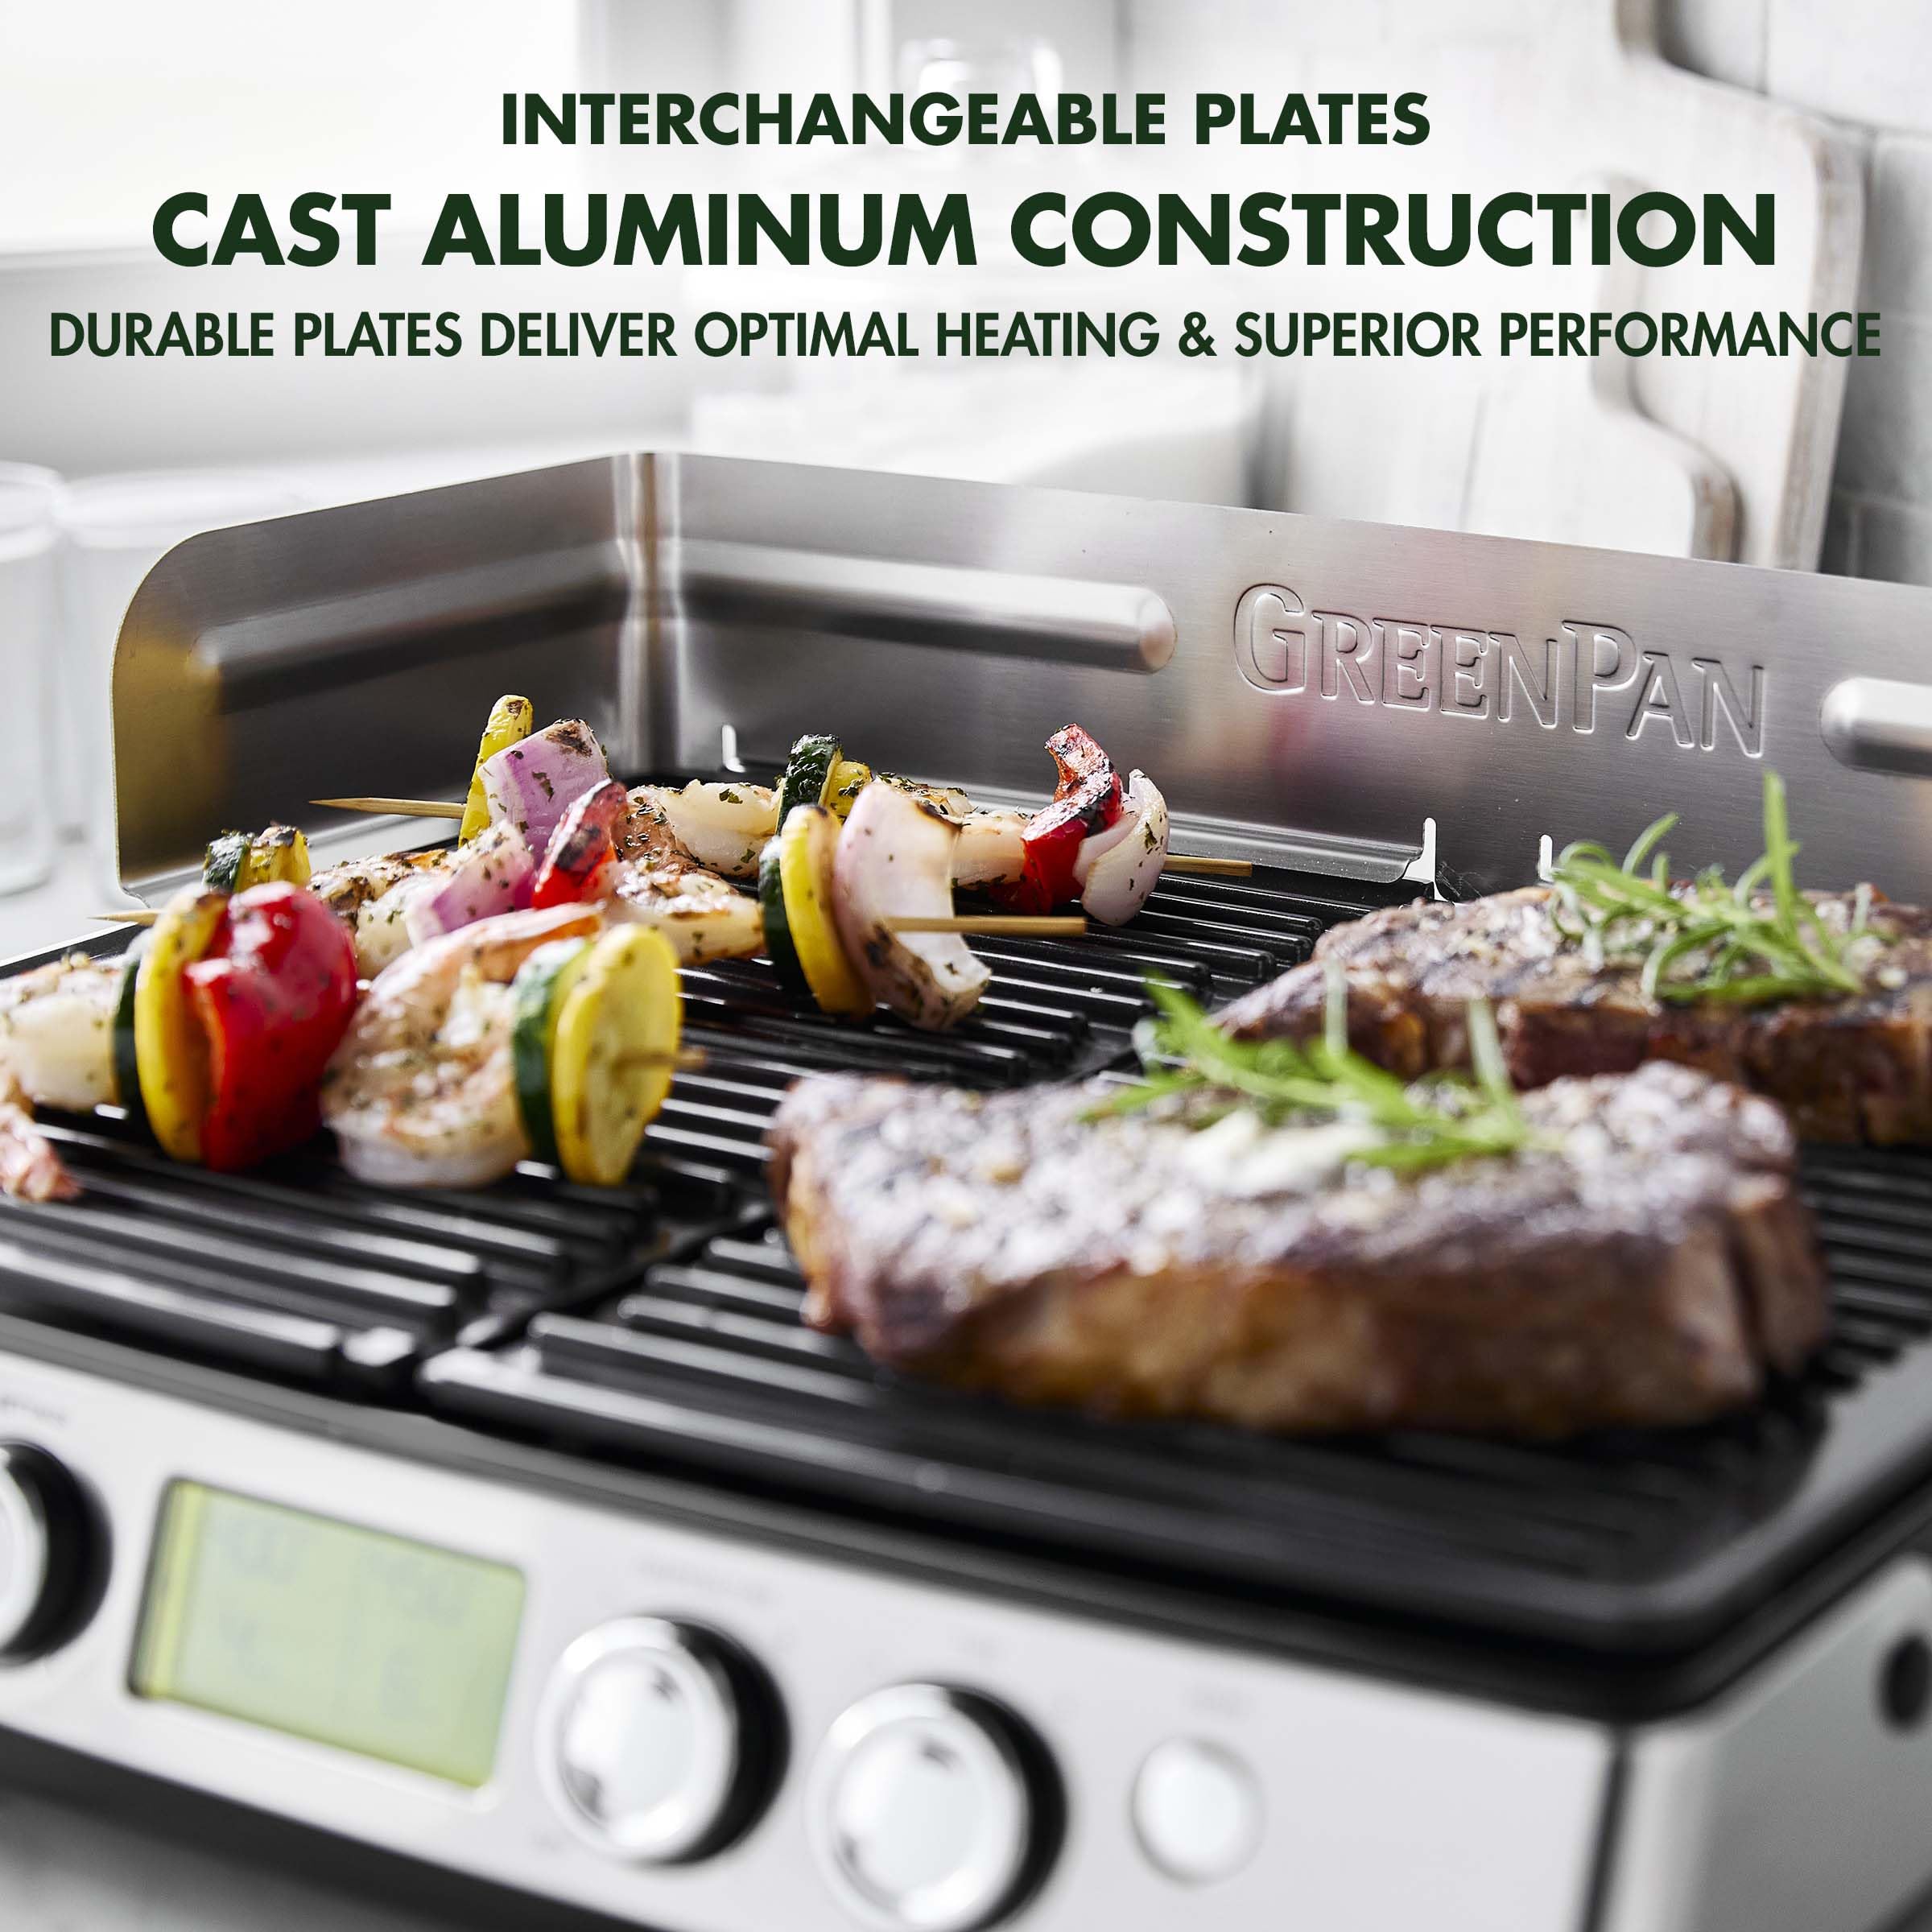 GreenPan Elite XL Smoke-less Grill and Griddle, Healthy Ceramic Nonstick Interchangeable/Removeable Cast Aluminum Plates, Indoor BBQ Sear Sizzle, LCD Display, Splash Guard, Drip Tray, PFAS-Free, Black